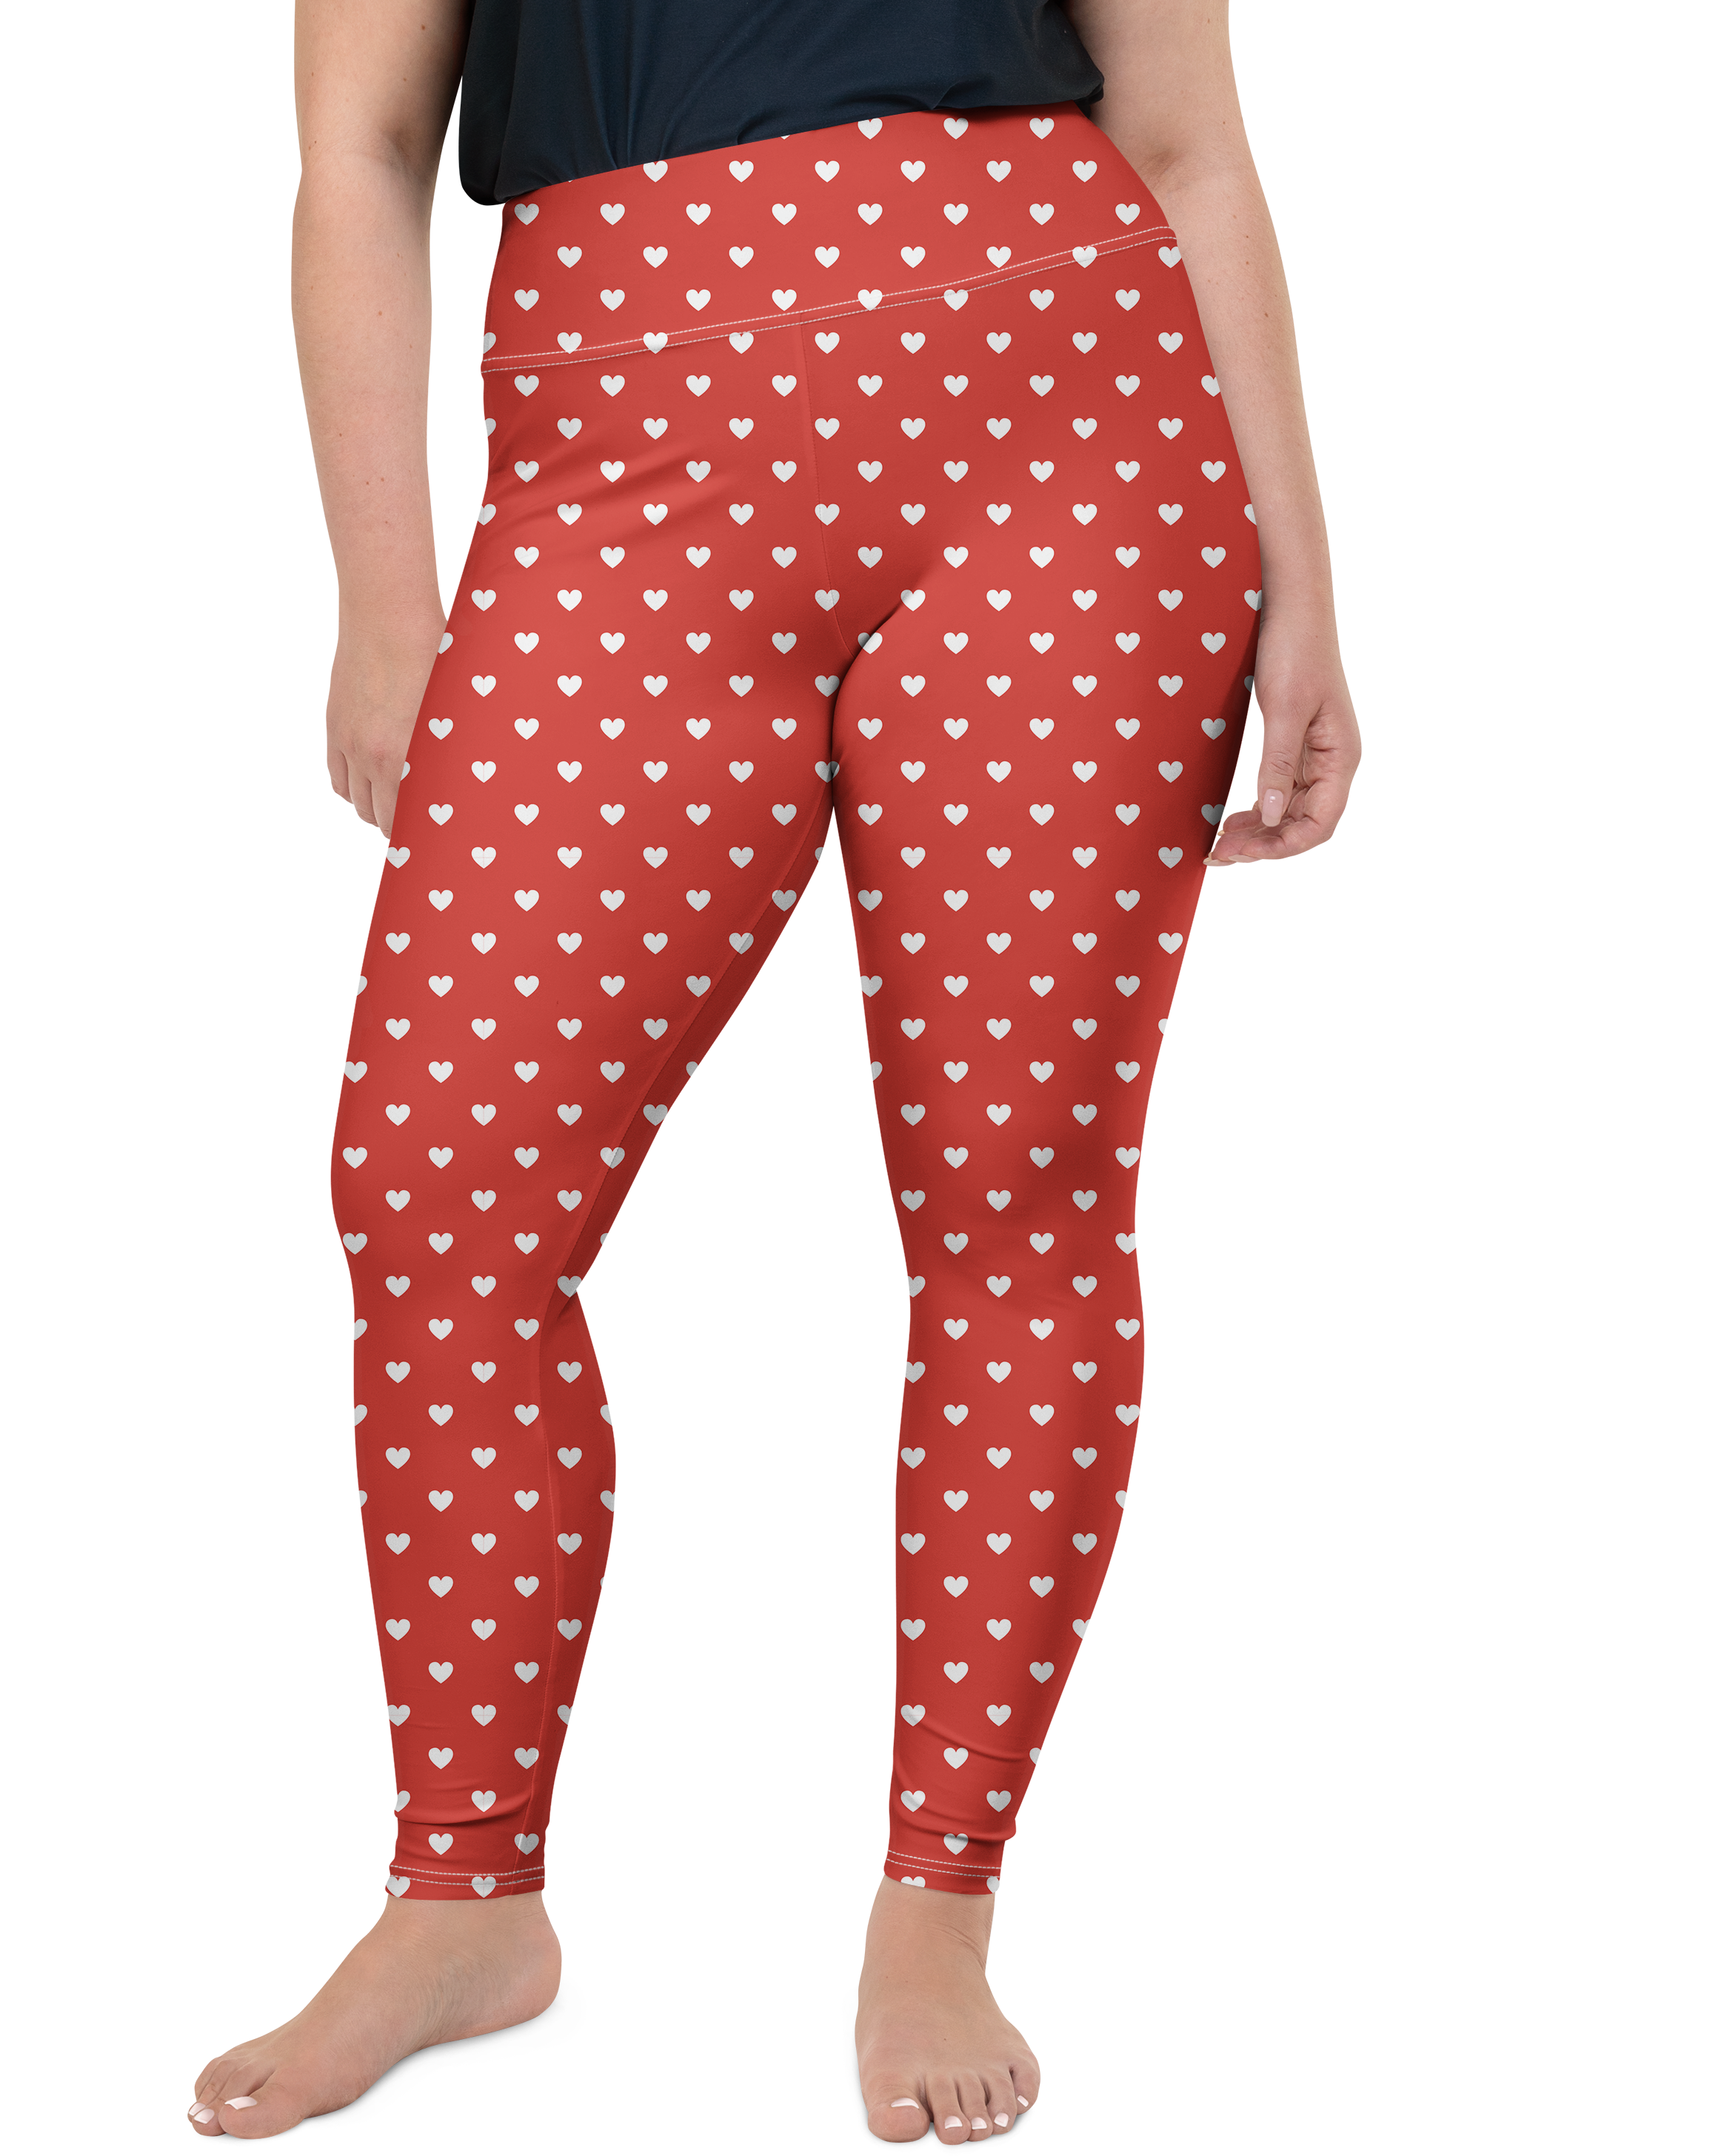 red and white leggings plus size